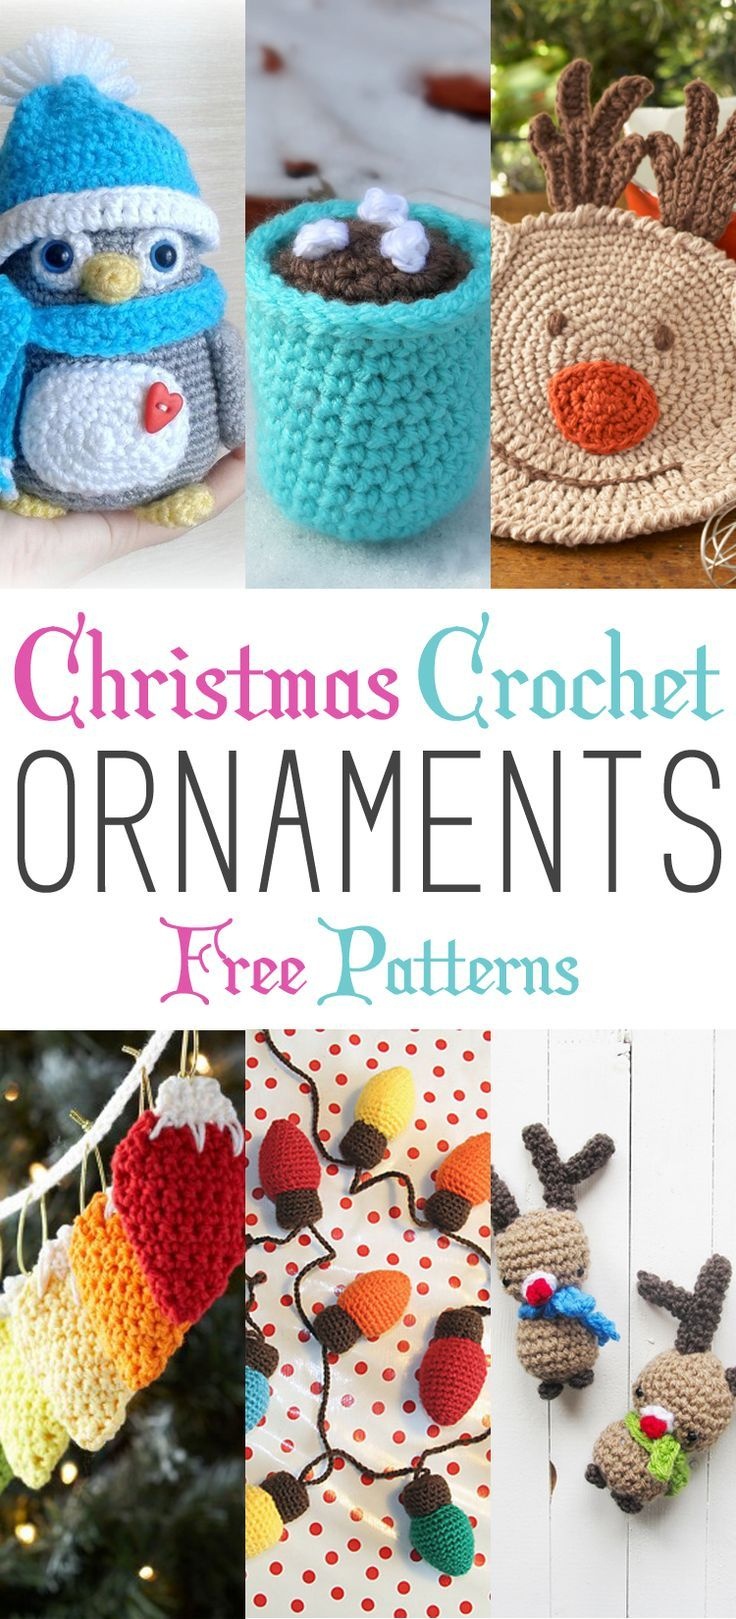 Christmas Crochet Ornaments With Free Patterns | Crochet Christmas - Free Printable Christmas Crochet Patterns